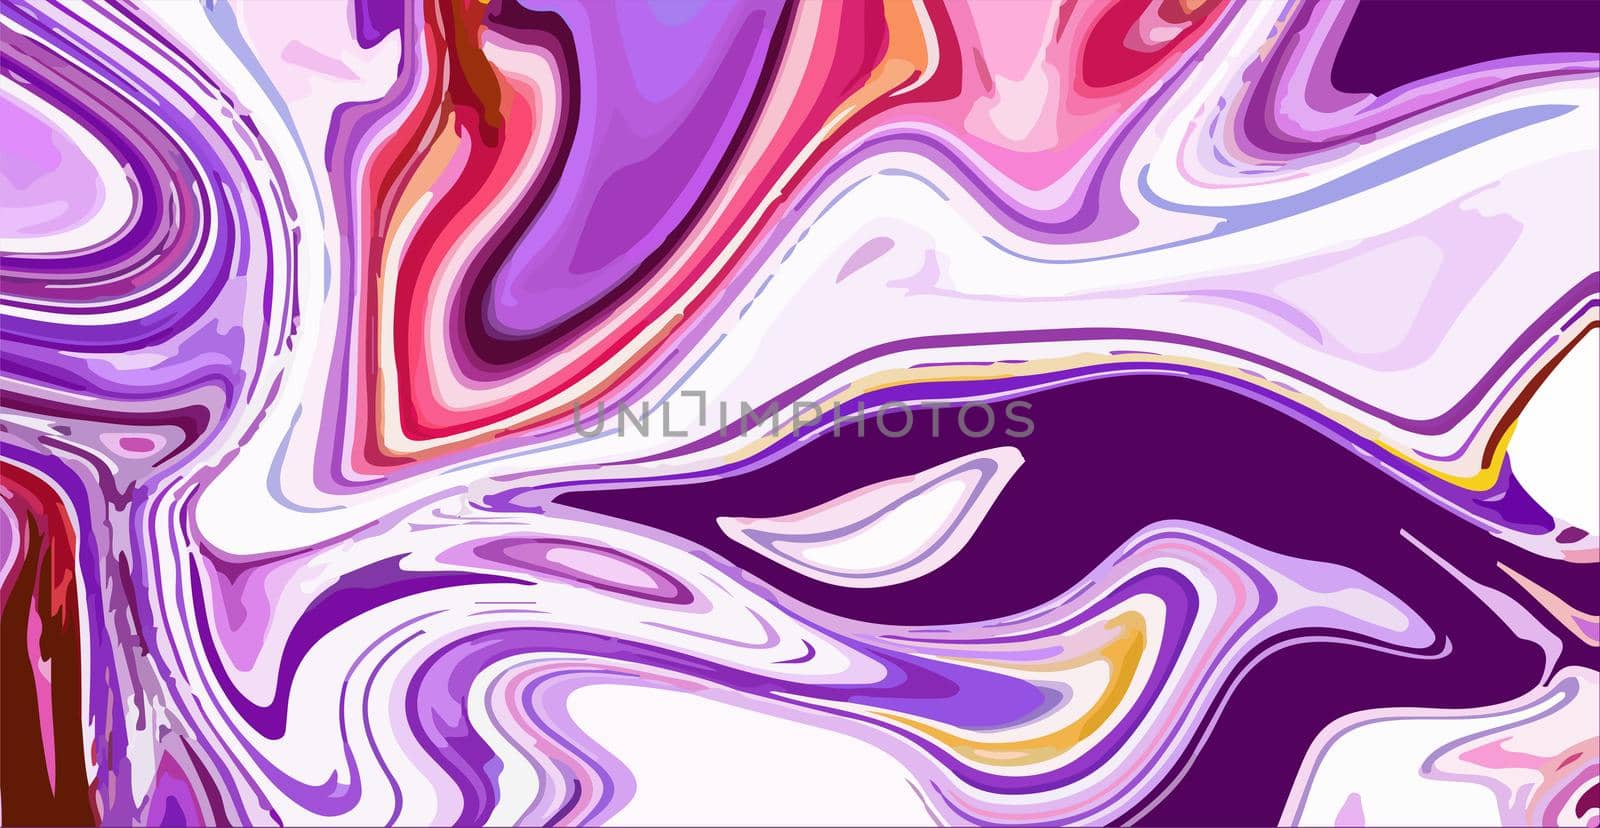 Background in liquid style. Liquid design with abstract elements. Applicable for design covers, presentation, invitation, flyers, annual reports, posters. by AndreyKENO